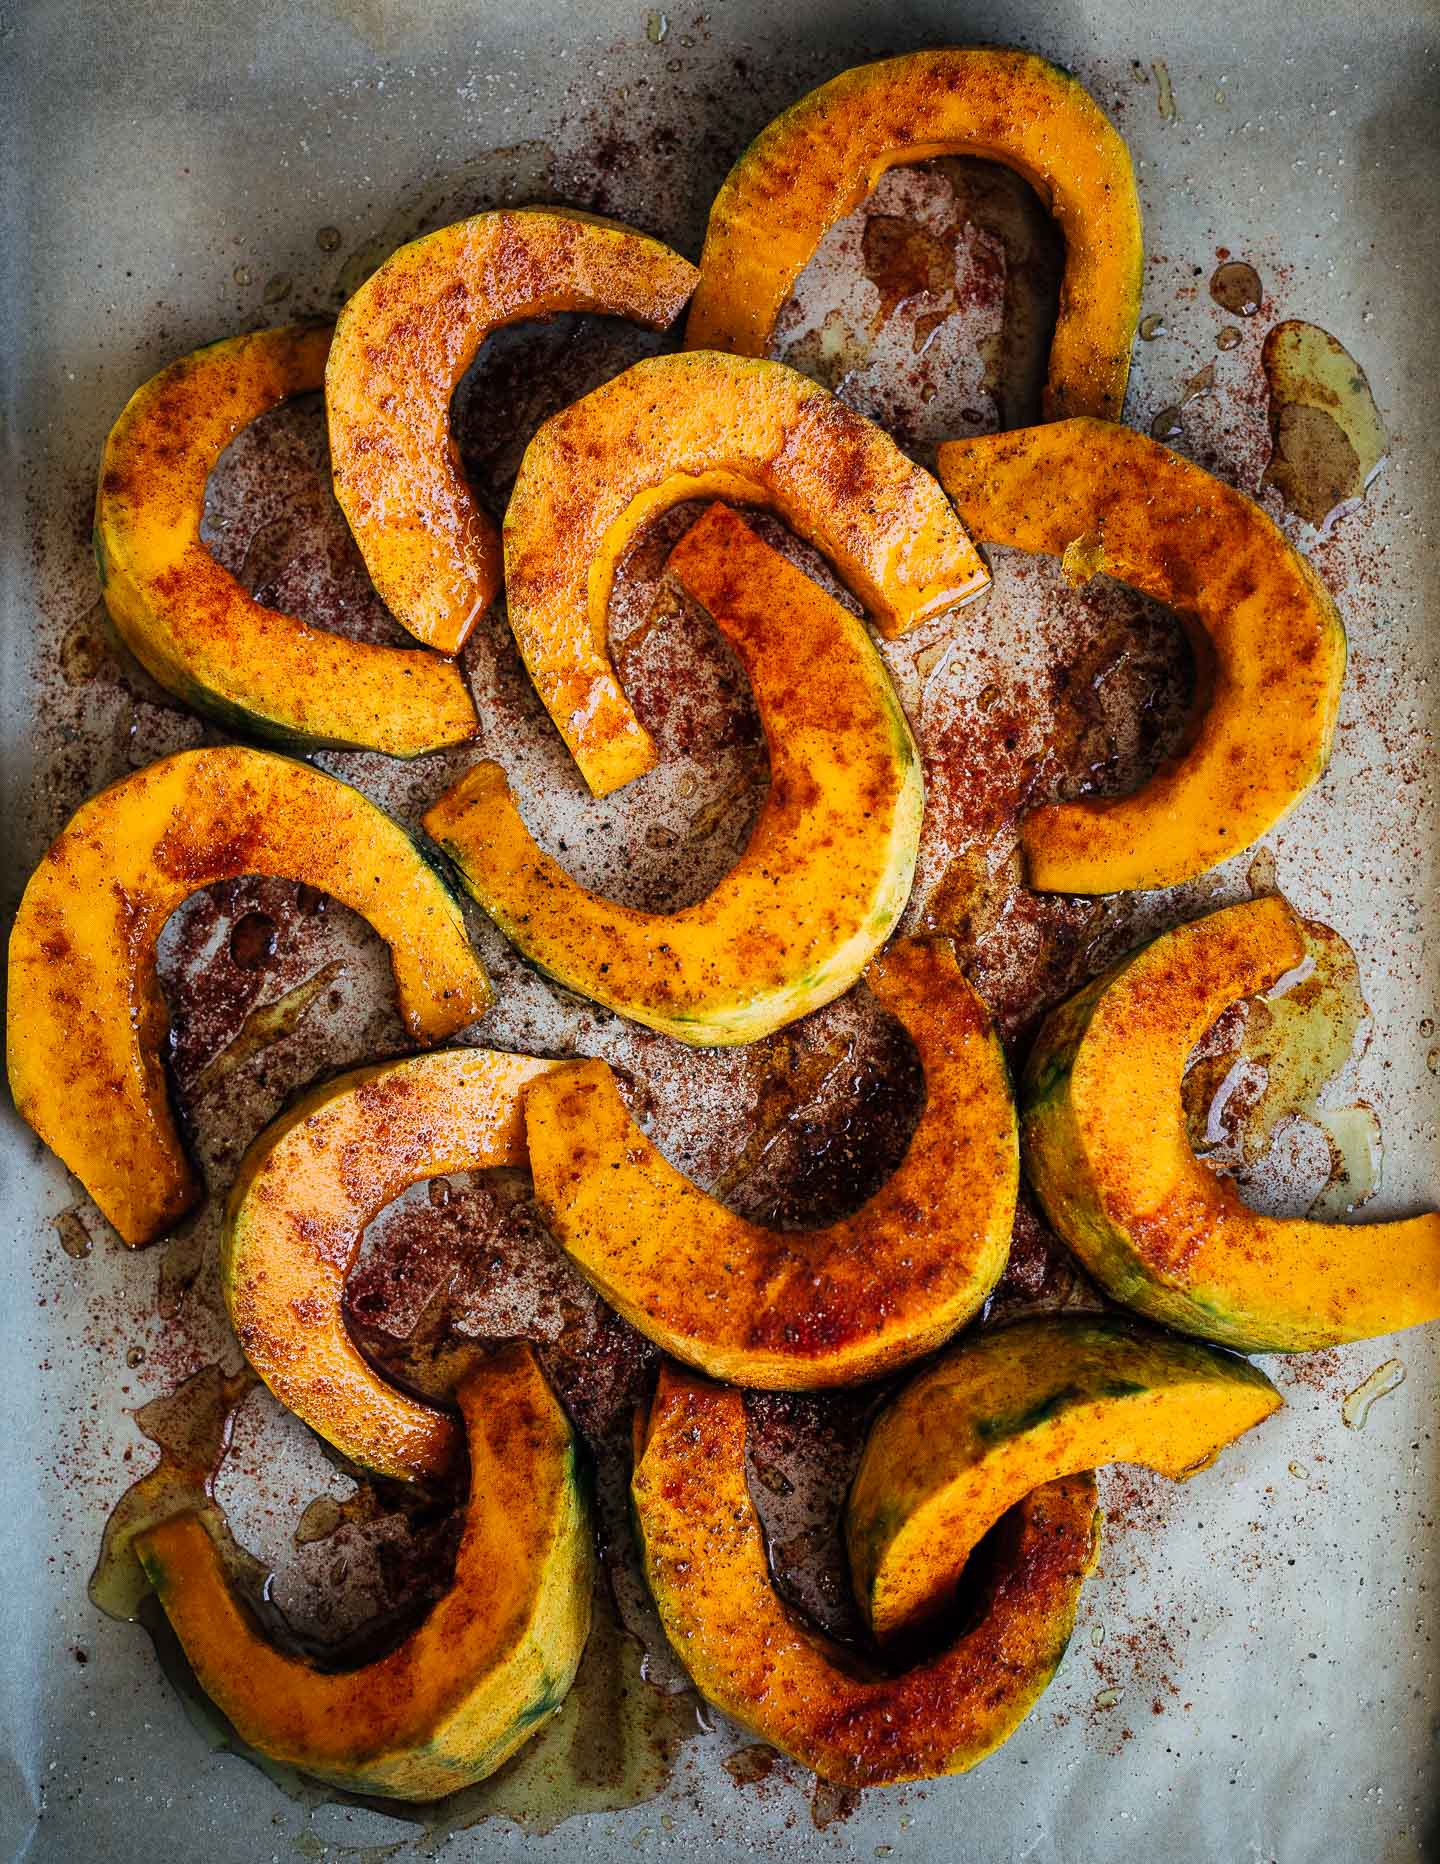 Kabocha squash wedges tossed with maple syrup, EVOO, paprika, and sea salt.